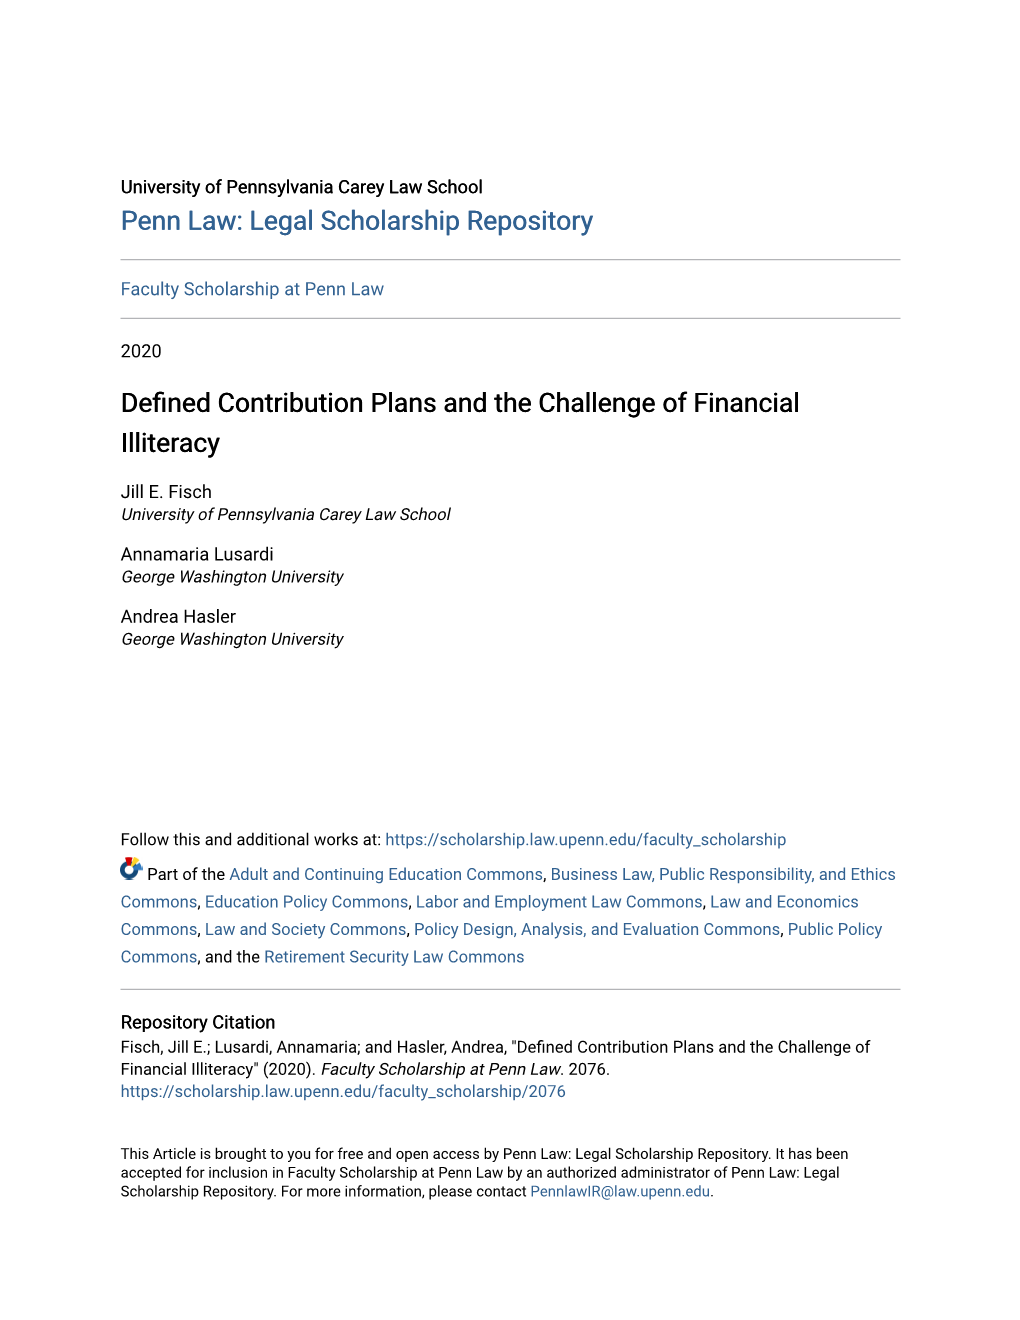 Defined Contribution Plans and the Challenge of Financial Illiteracy